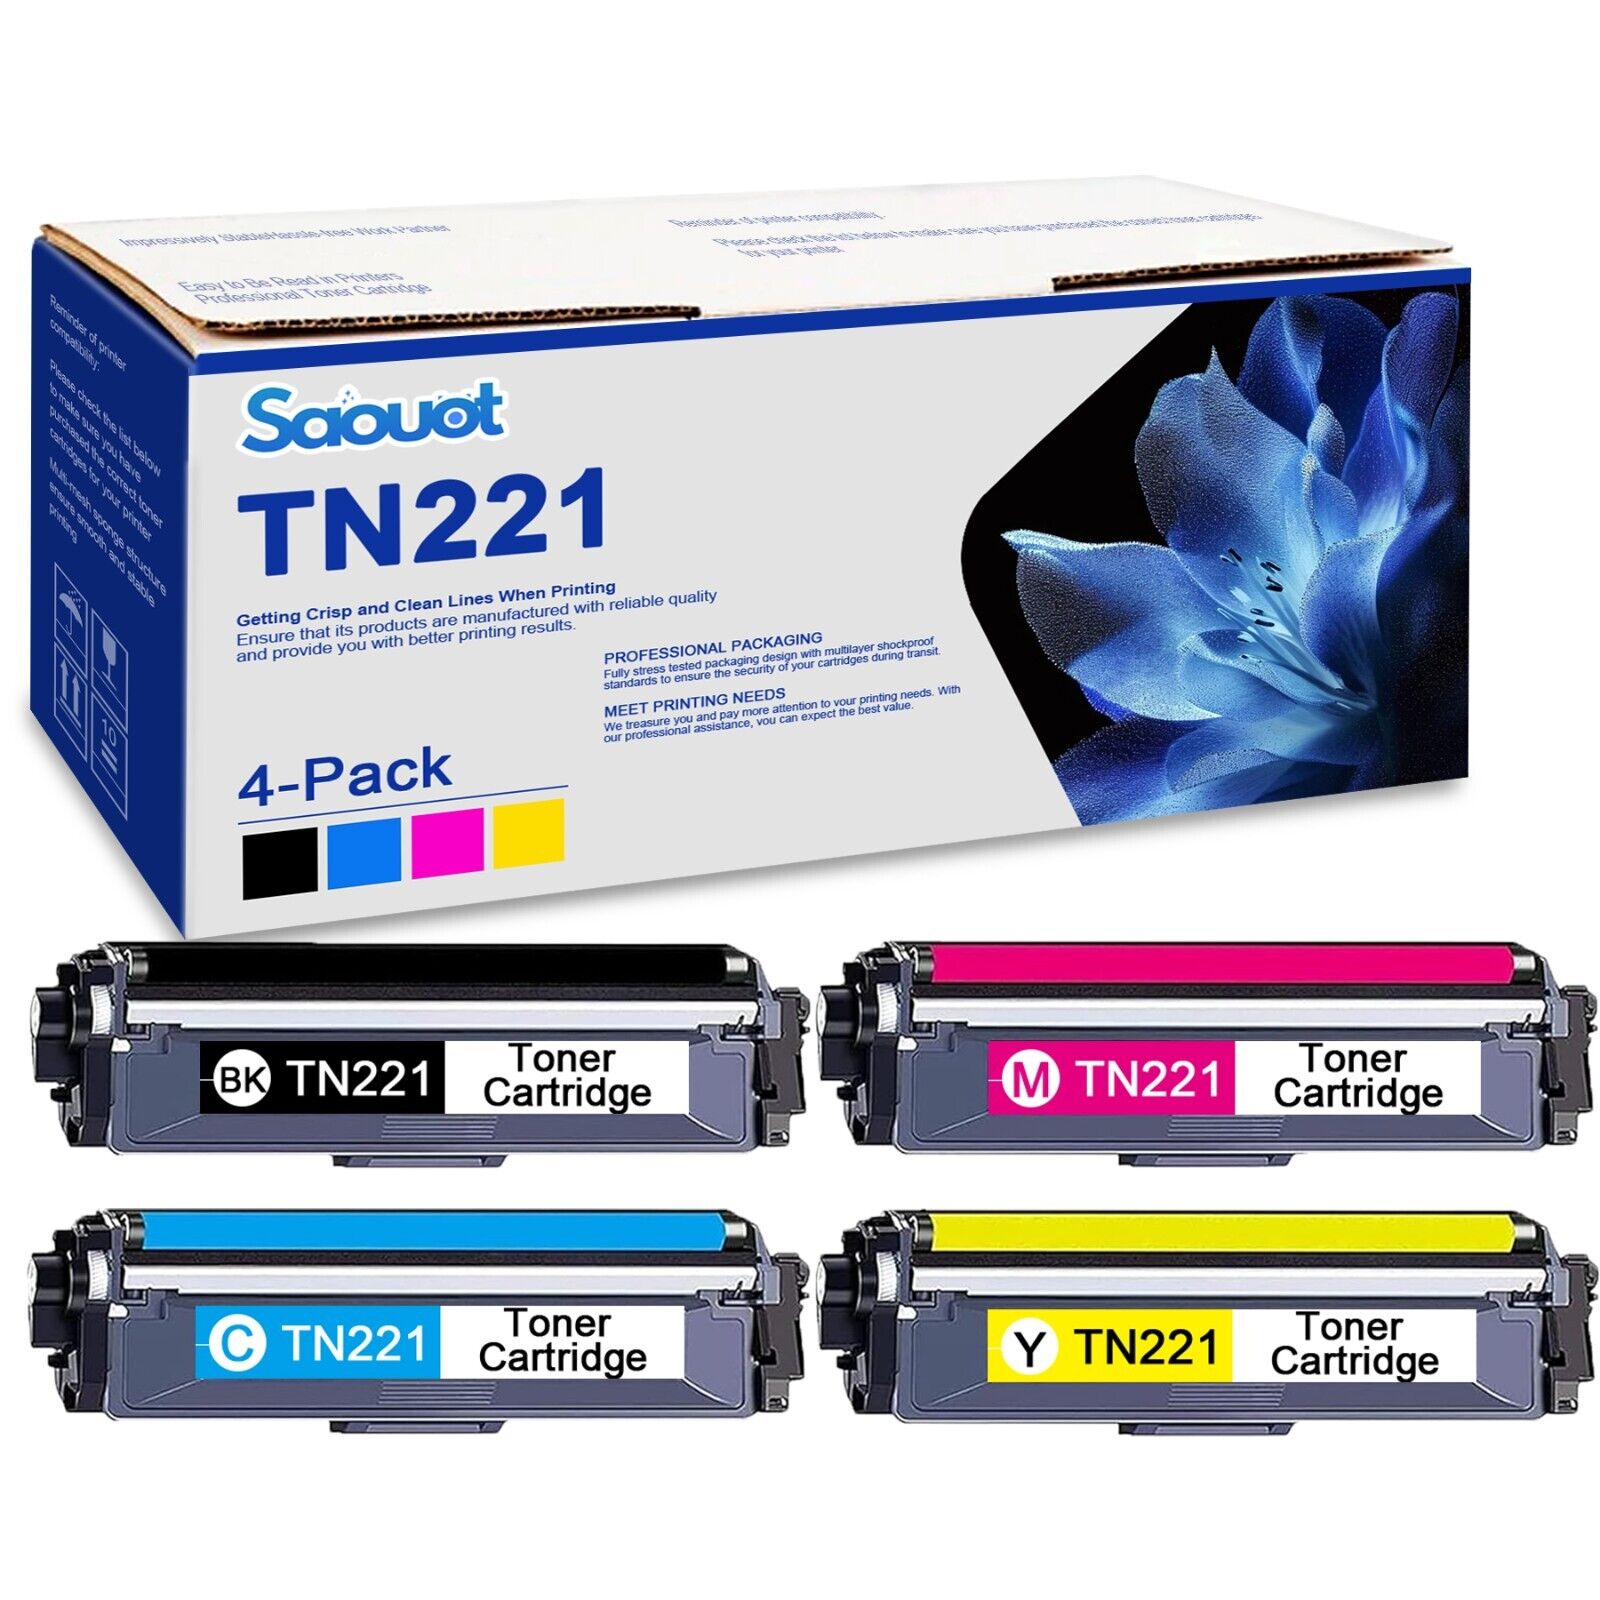 TN221 Toner Cartridges Replacement for Brother MFC-9130CW HL-3170CDW HL-3140CW